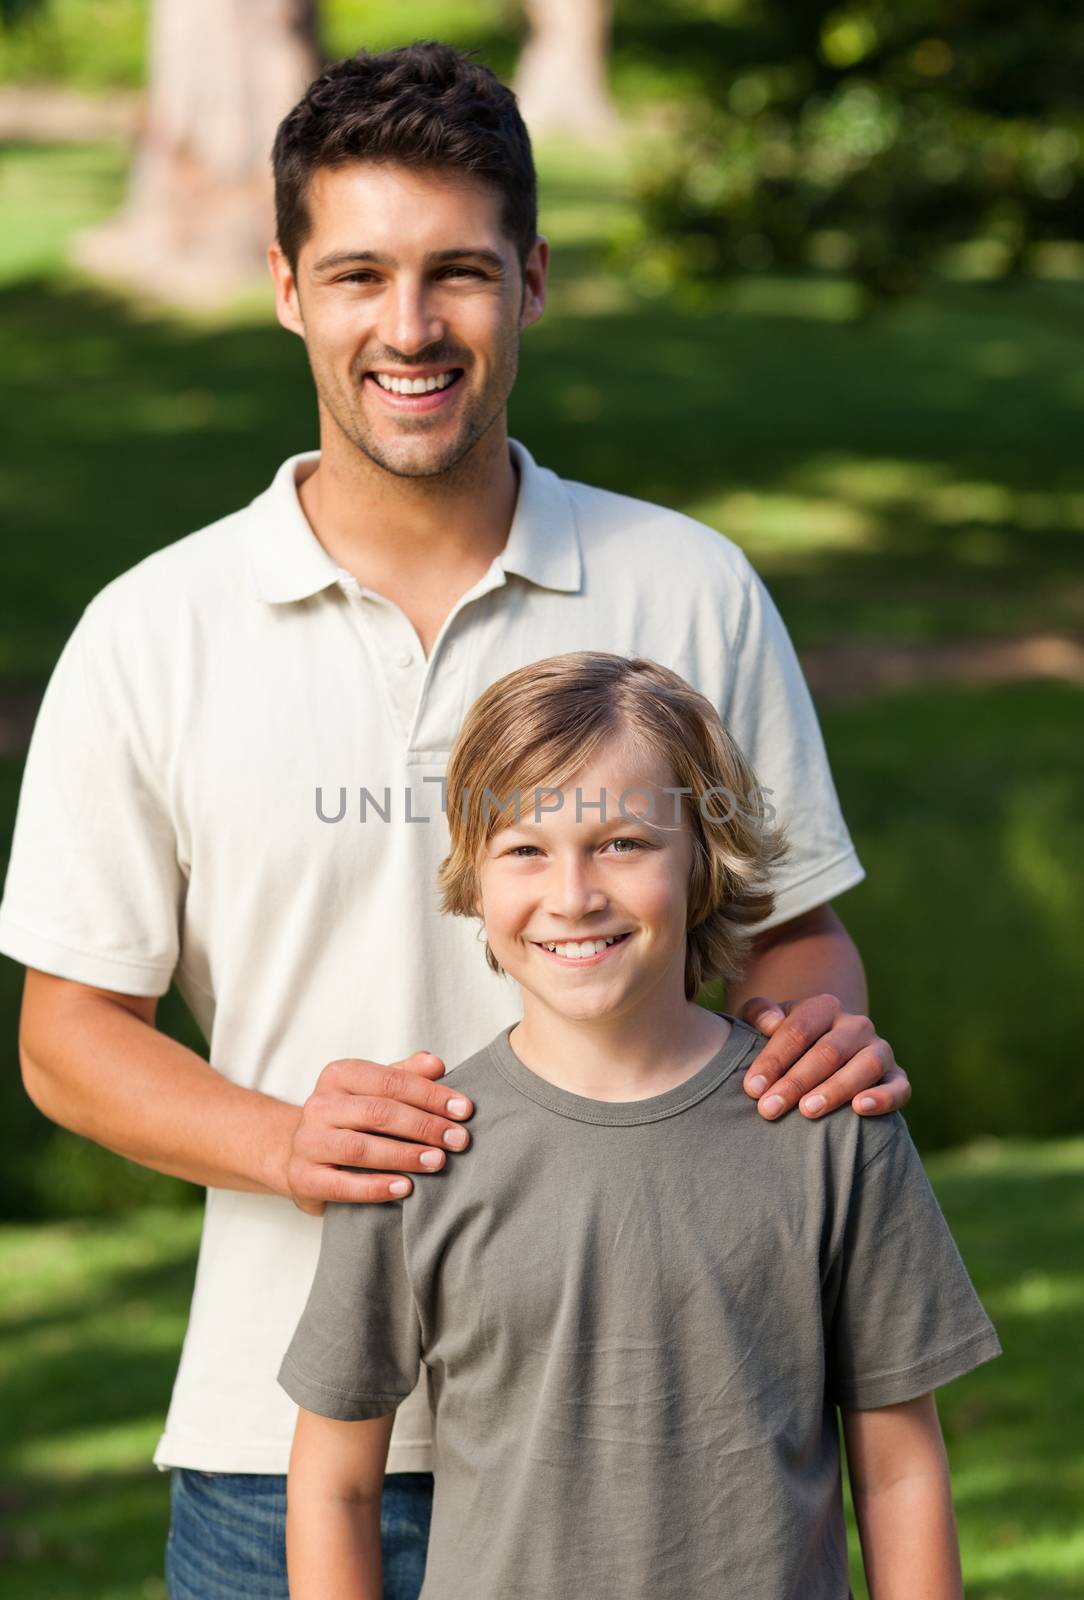 Son and his father in the park during the summer